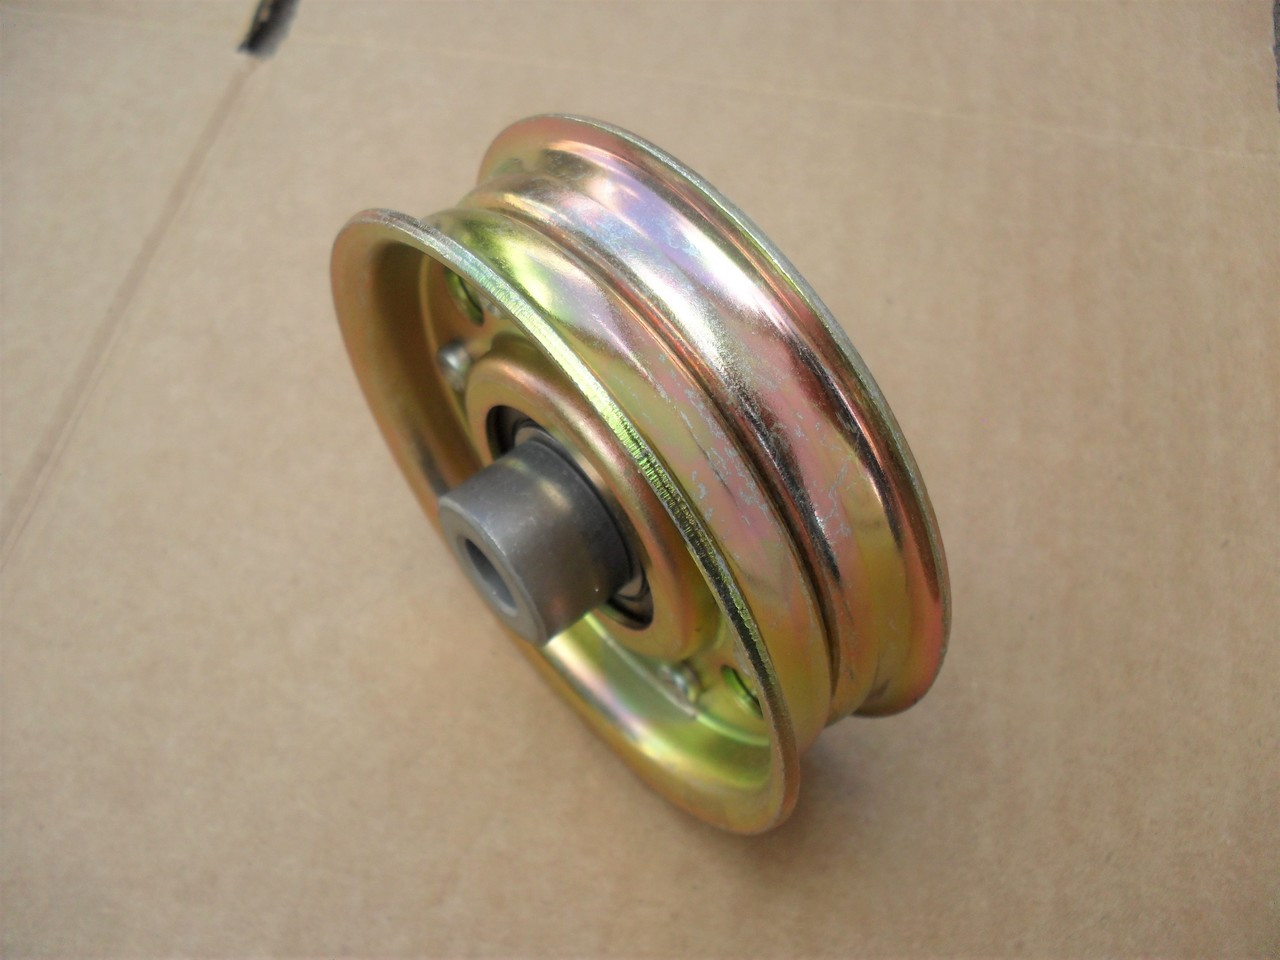 Idler Pulley for Scag 481048 48201 483208 Height: 1" ID: 3/8" OD: 3-1/4"